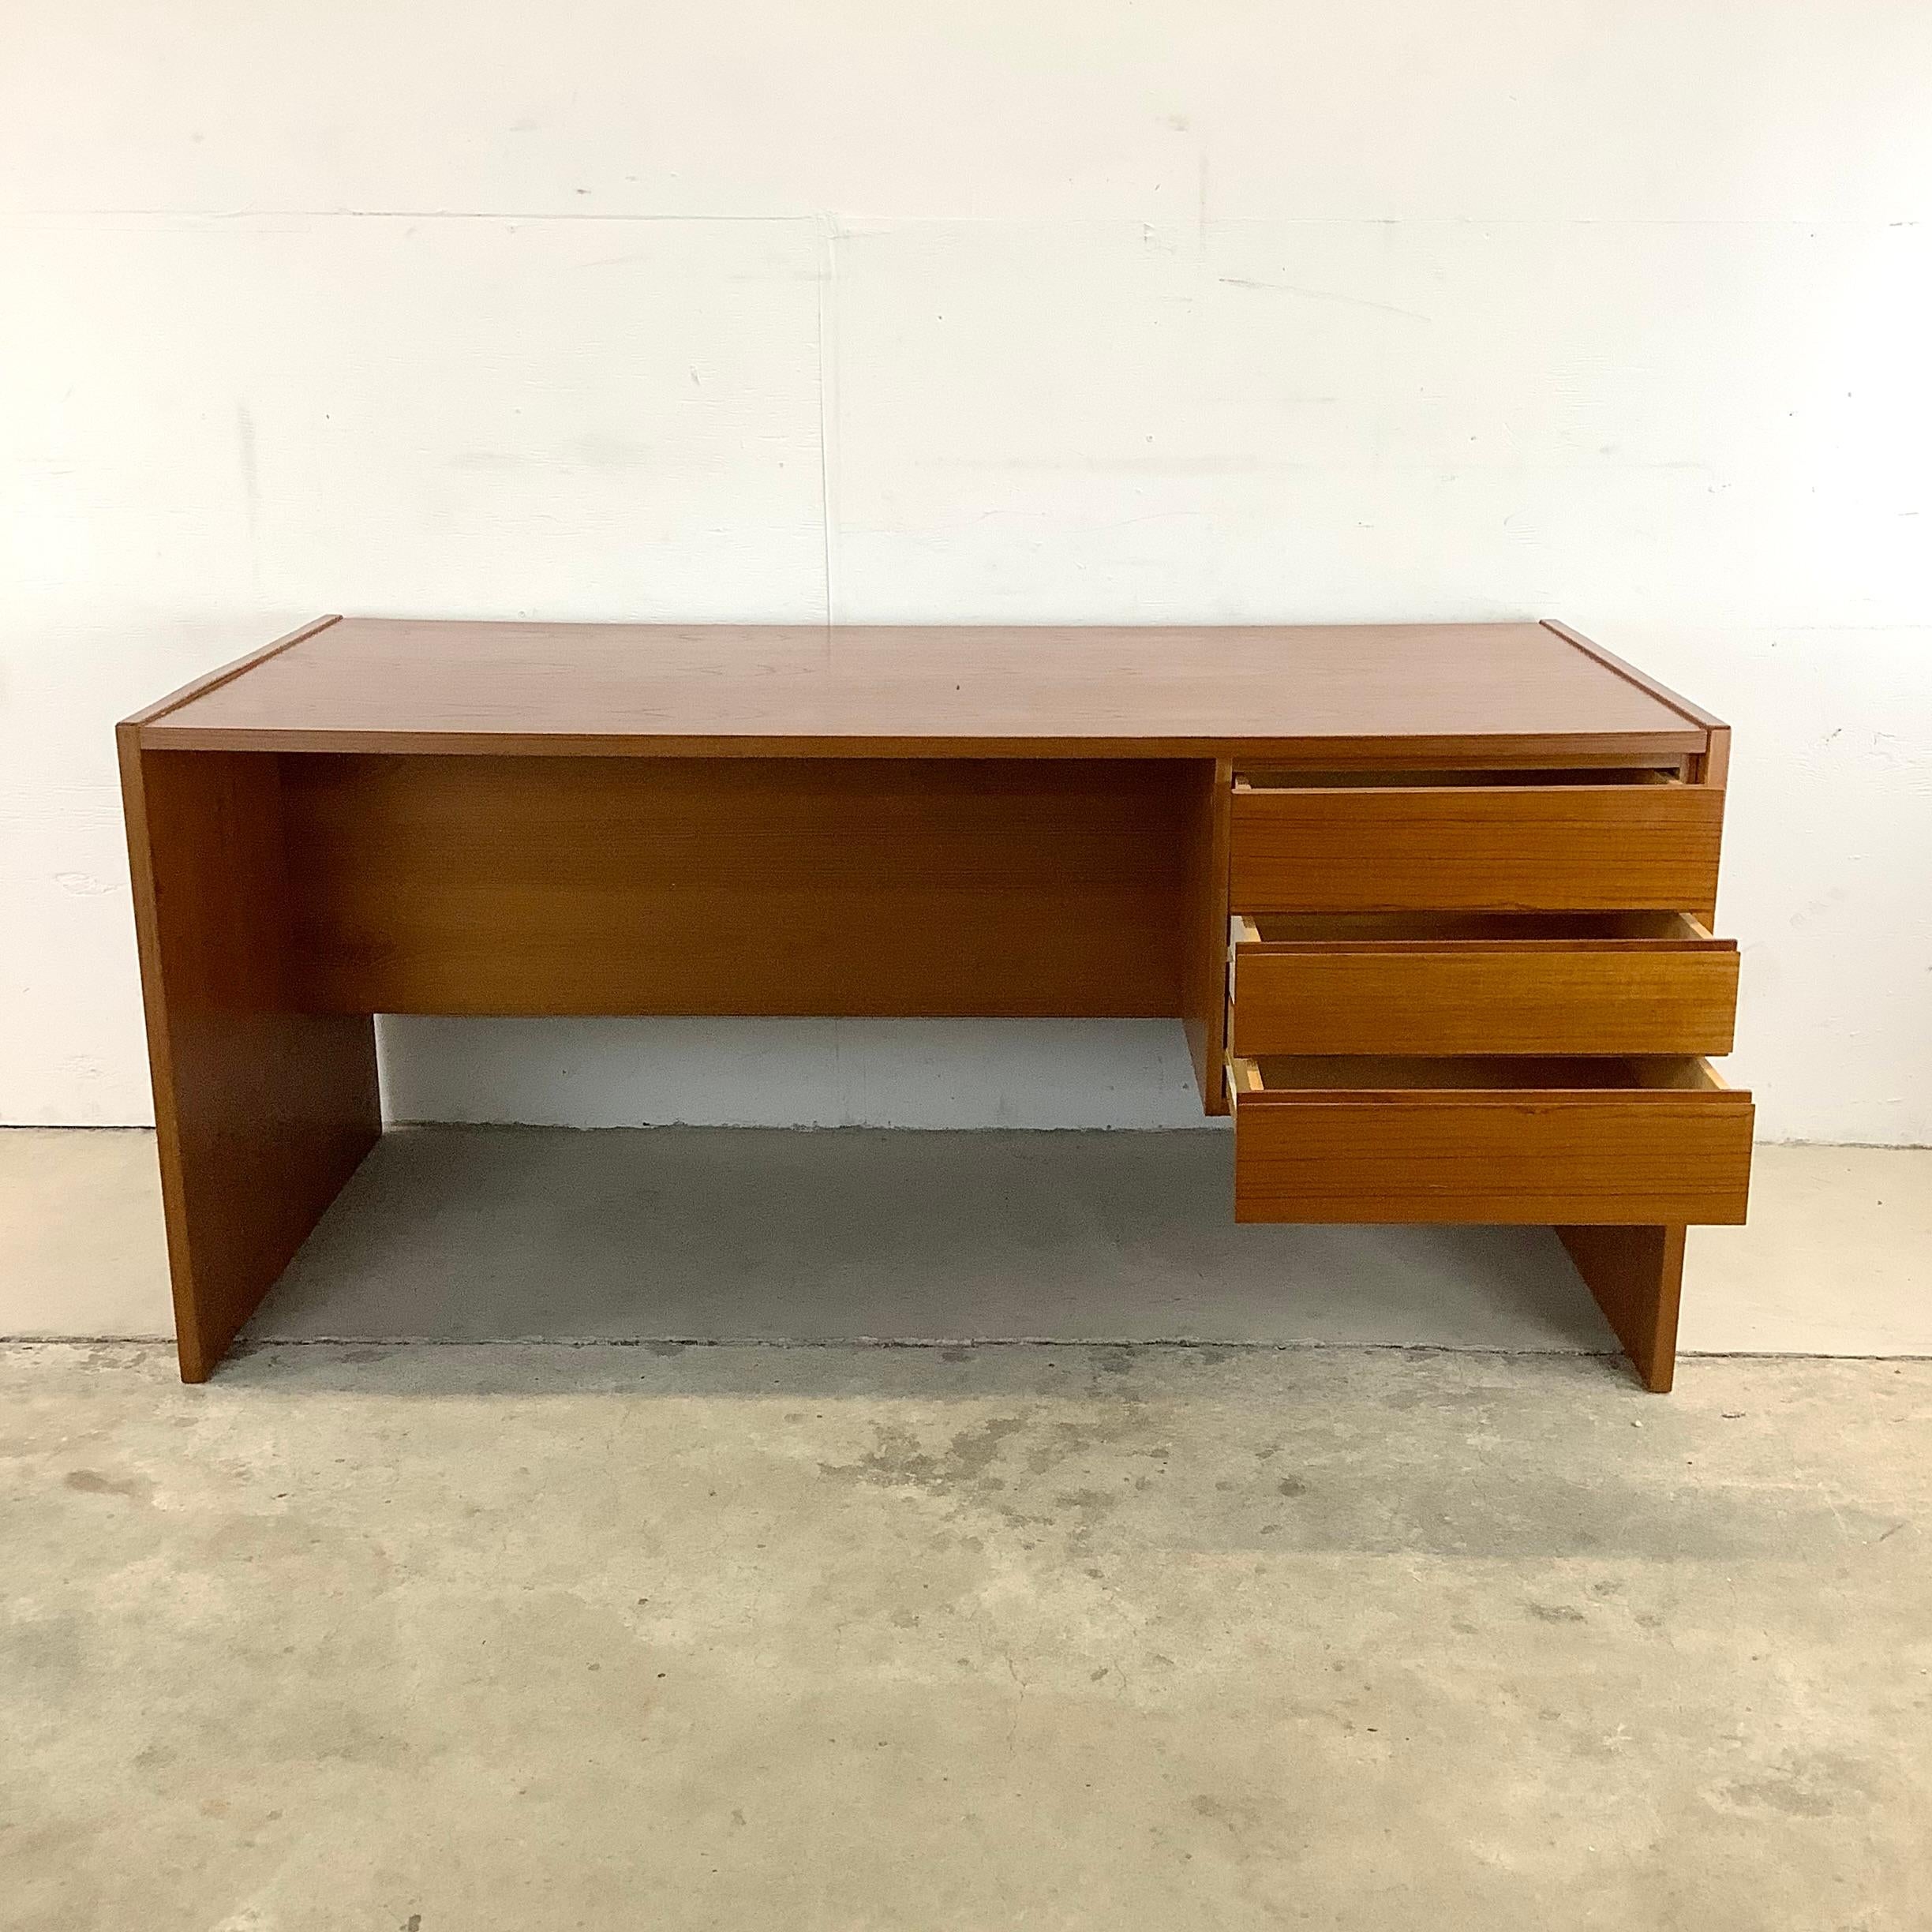 This striking Scandinavian Modern style office desk offers a wide workspace with right side drawers perfect for home office settings. The finished back of this large writing desk make it a good fit whether against the wall or floating mid-room. The